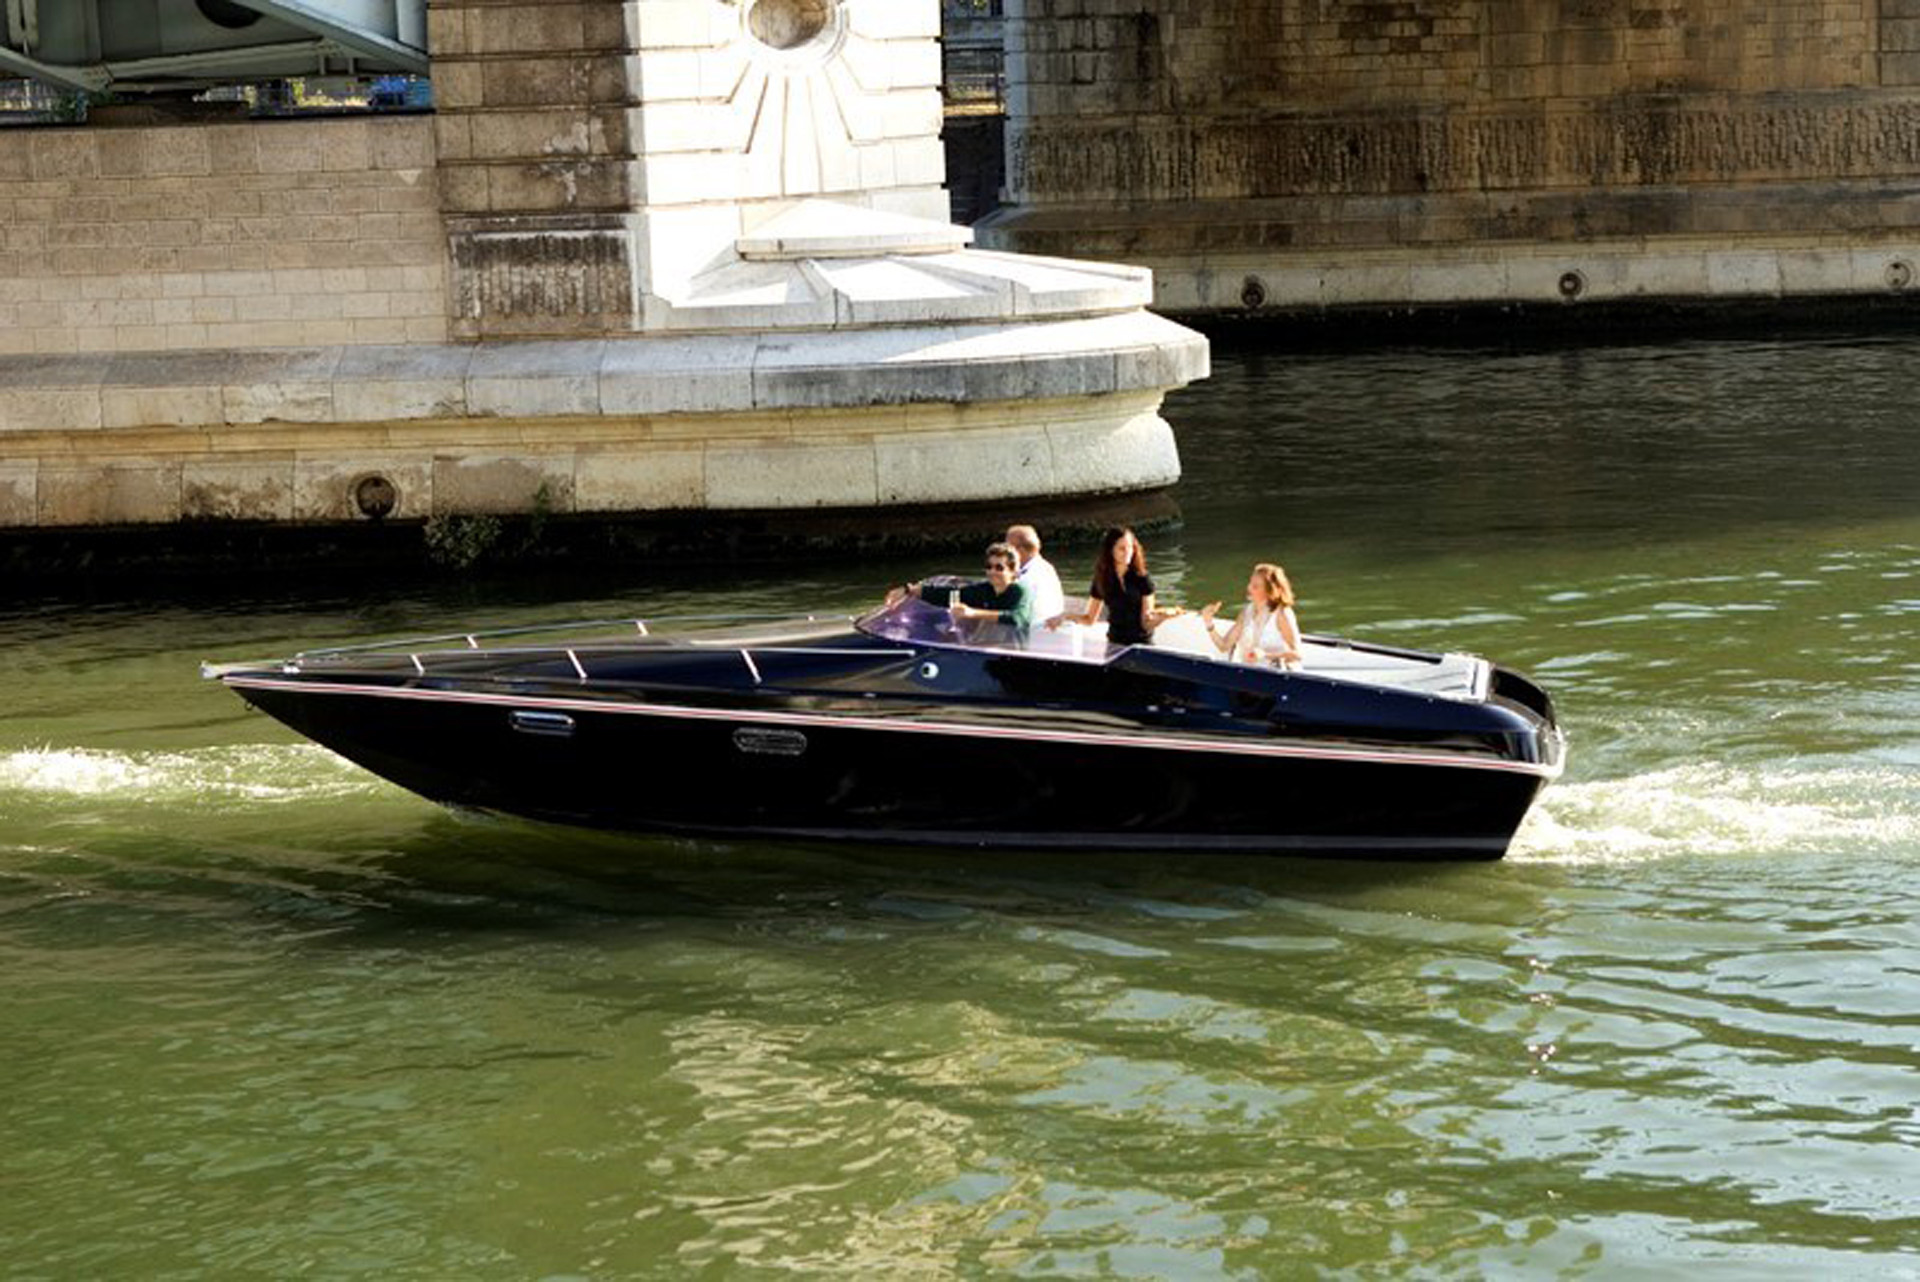 Black Swan: a 100% electric passenger boat will cruise down the Seine using recycled batteries